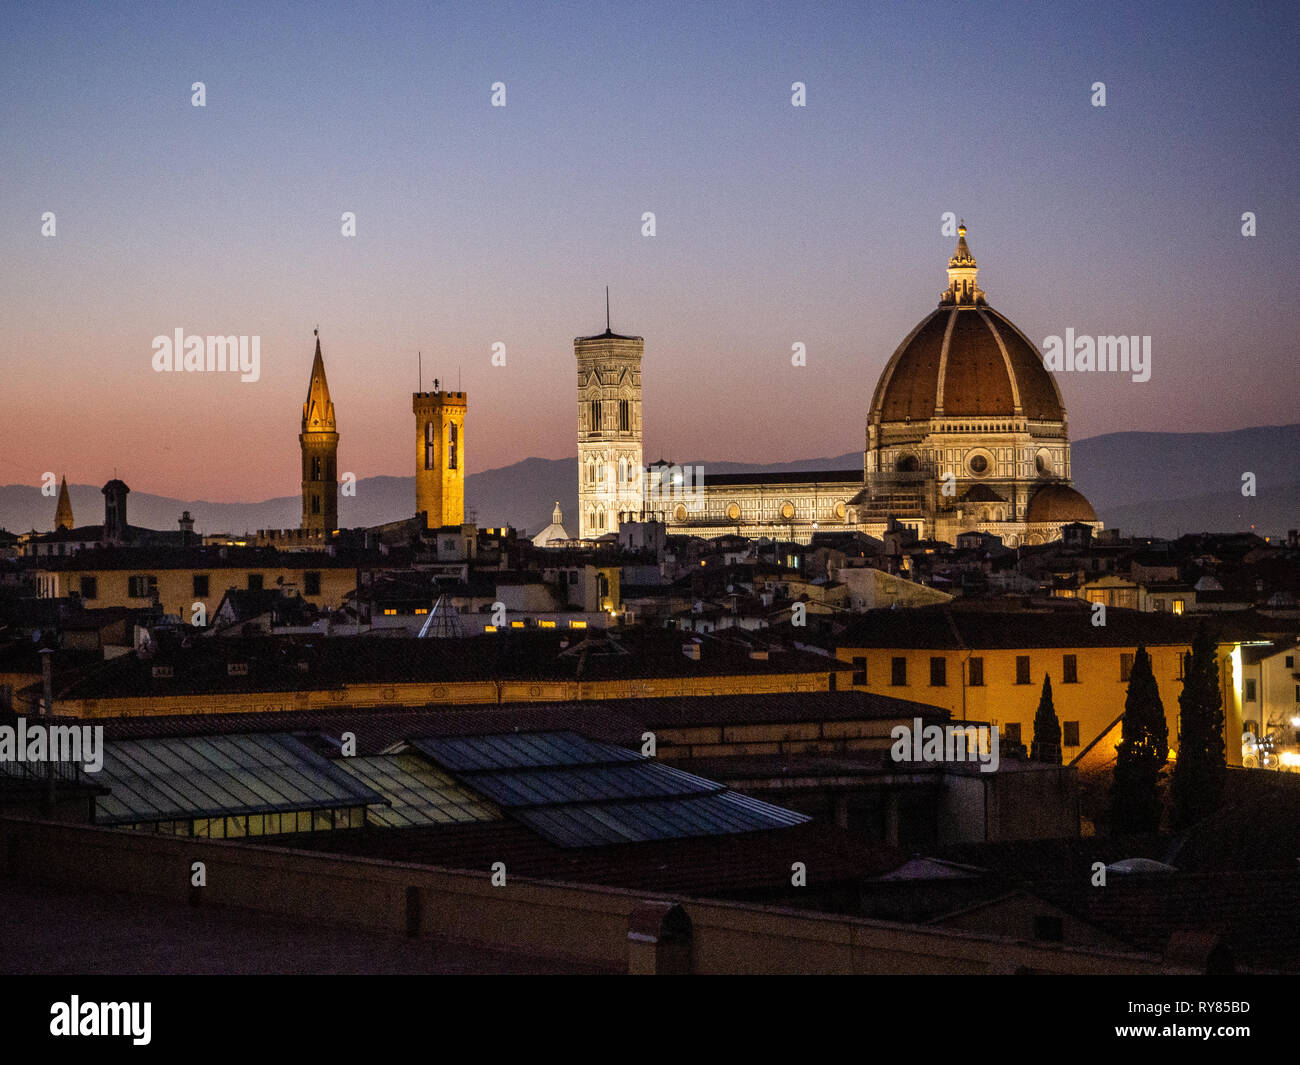 Cathedral of Santa Maria del Fiore, in Florence and its baptistery seen from afar Stock Photo